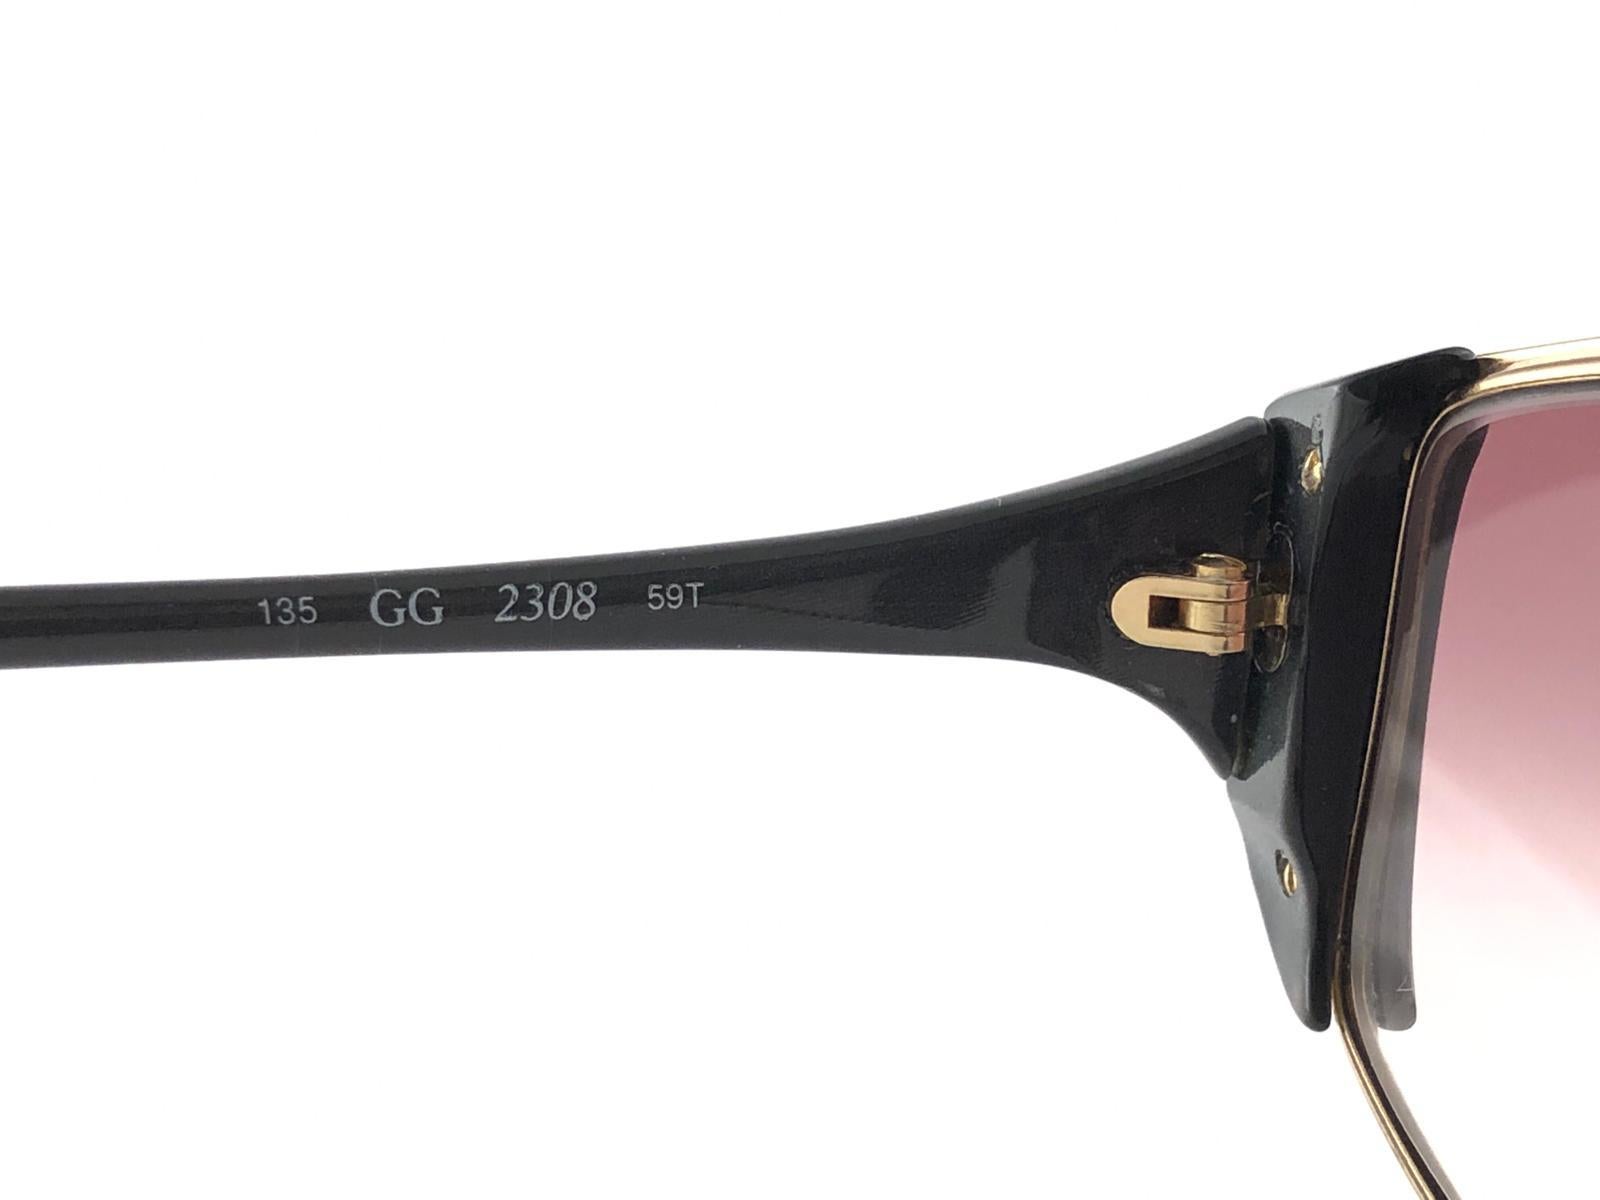 New Vintage Gucci 2308 Black Cat Eye Sunglasses 1980's Made in Italy In New Condition For Sale In Baleares, Baleares